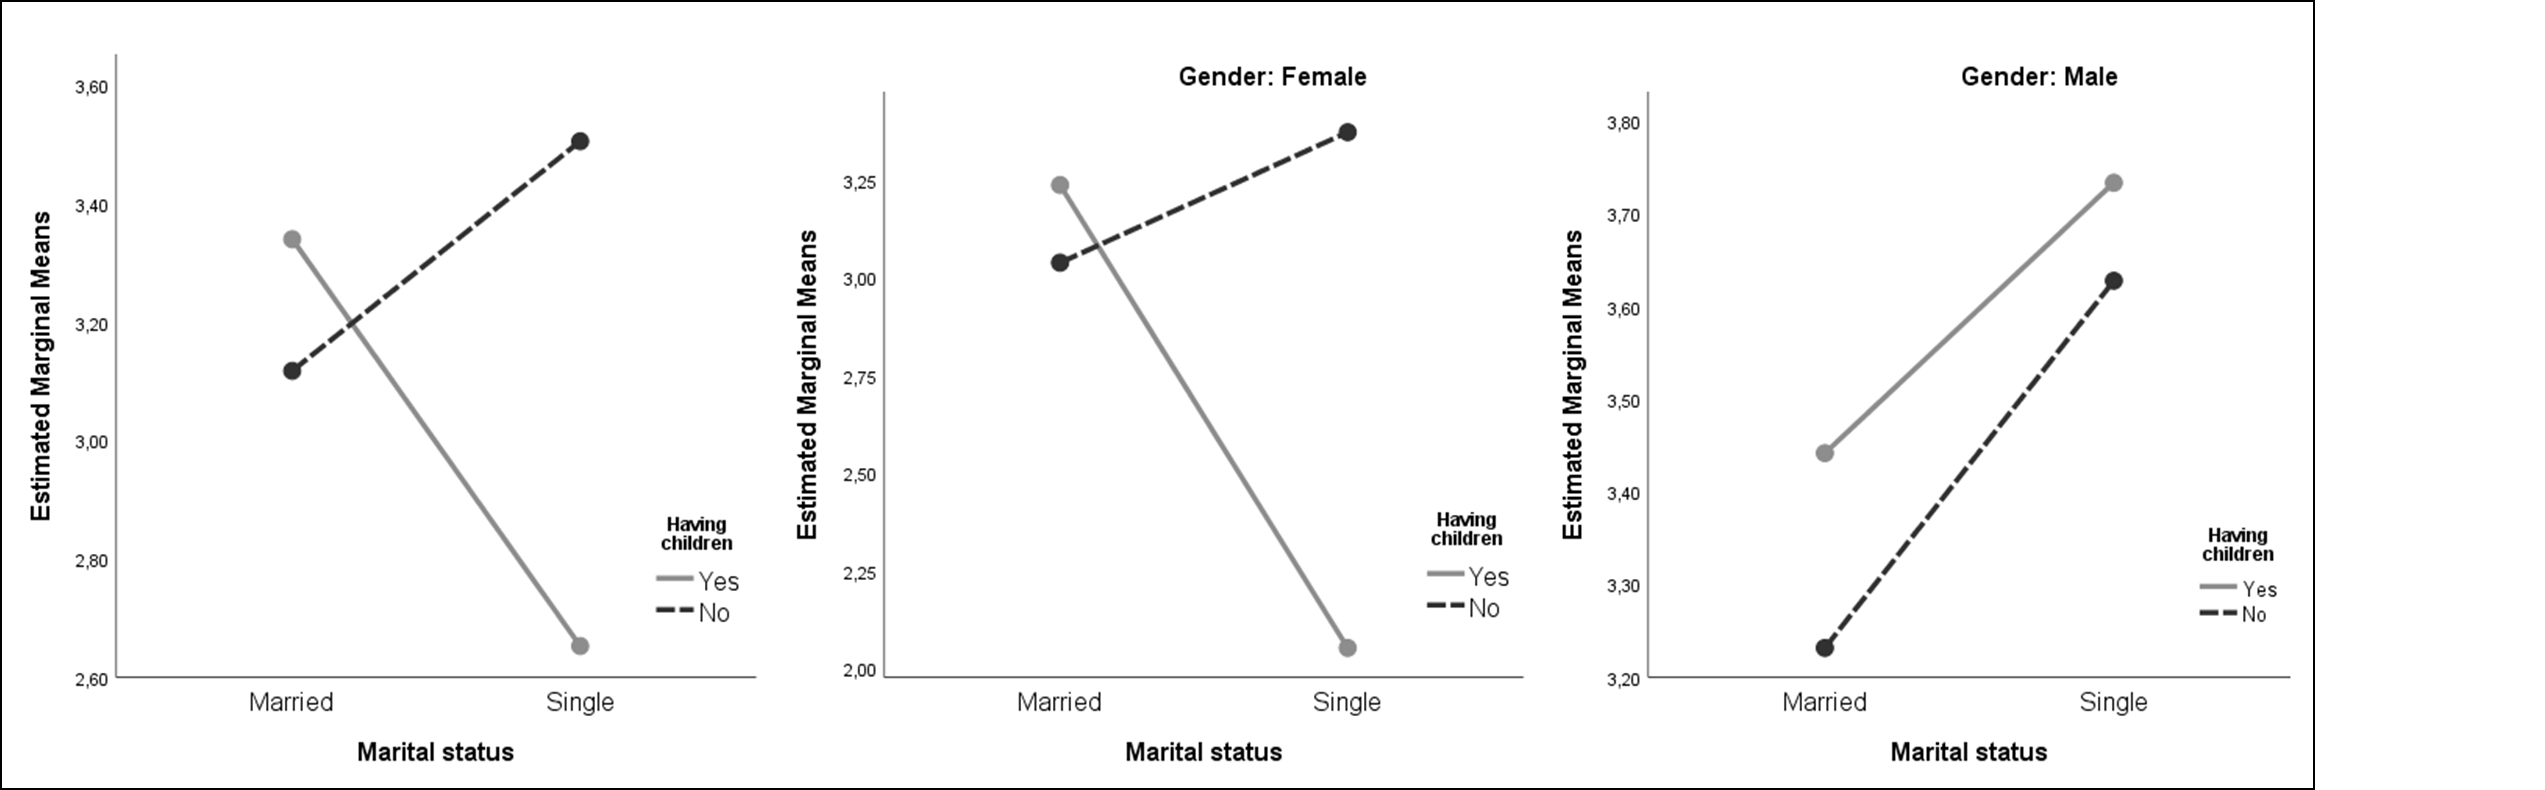 Marital status and having children interactions for entrepreneurial intention